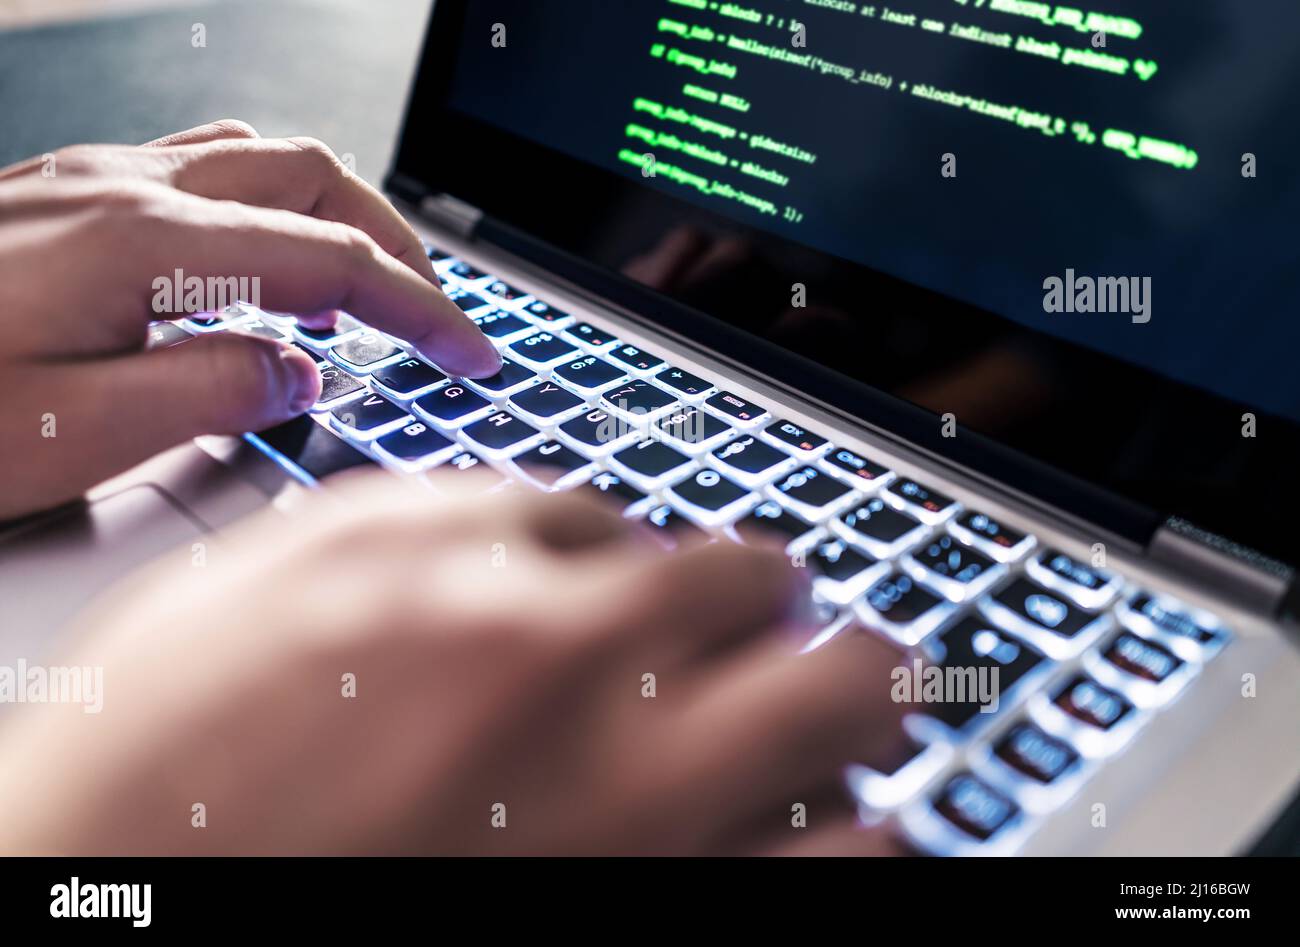 Hacker code in laptop. Cyber security, privacy or hack threat. Coder or programmer writing virus software, malware, internet attack. Stock Photo